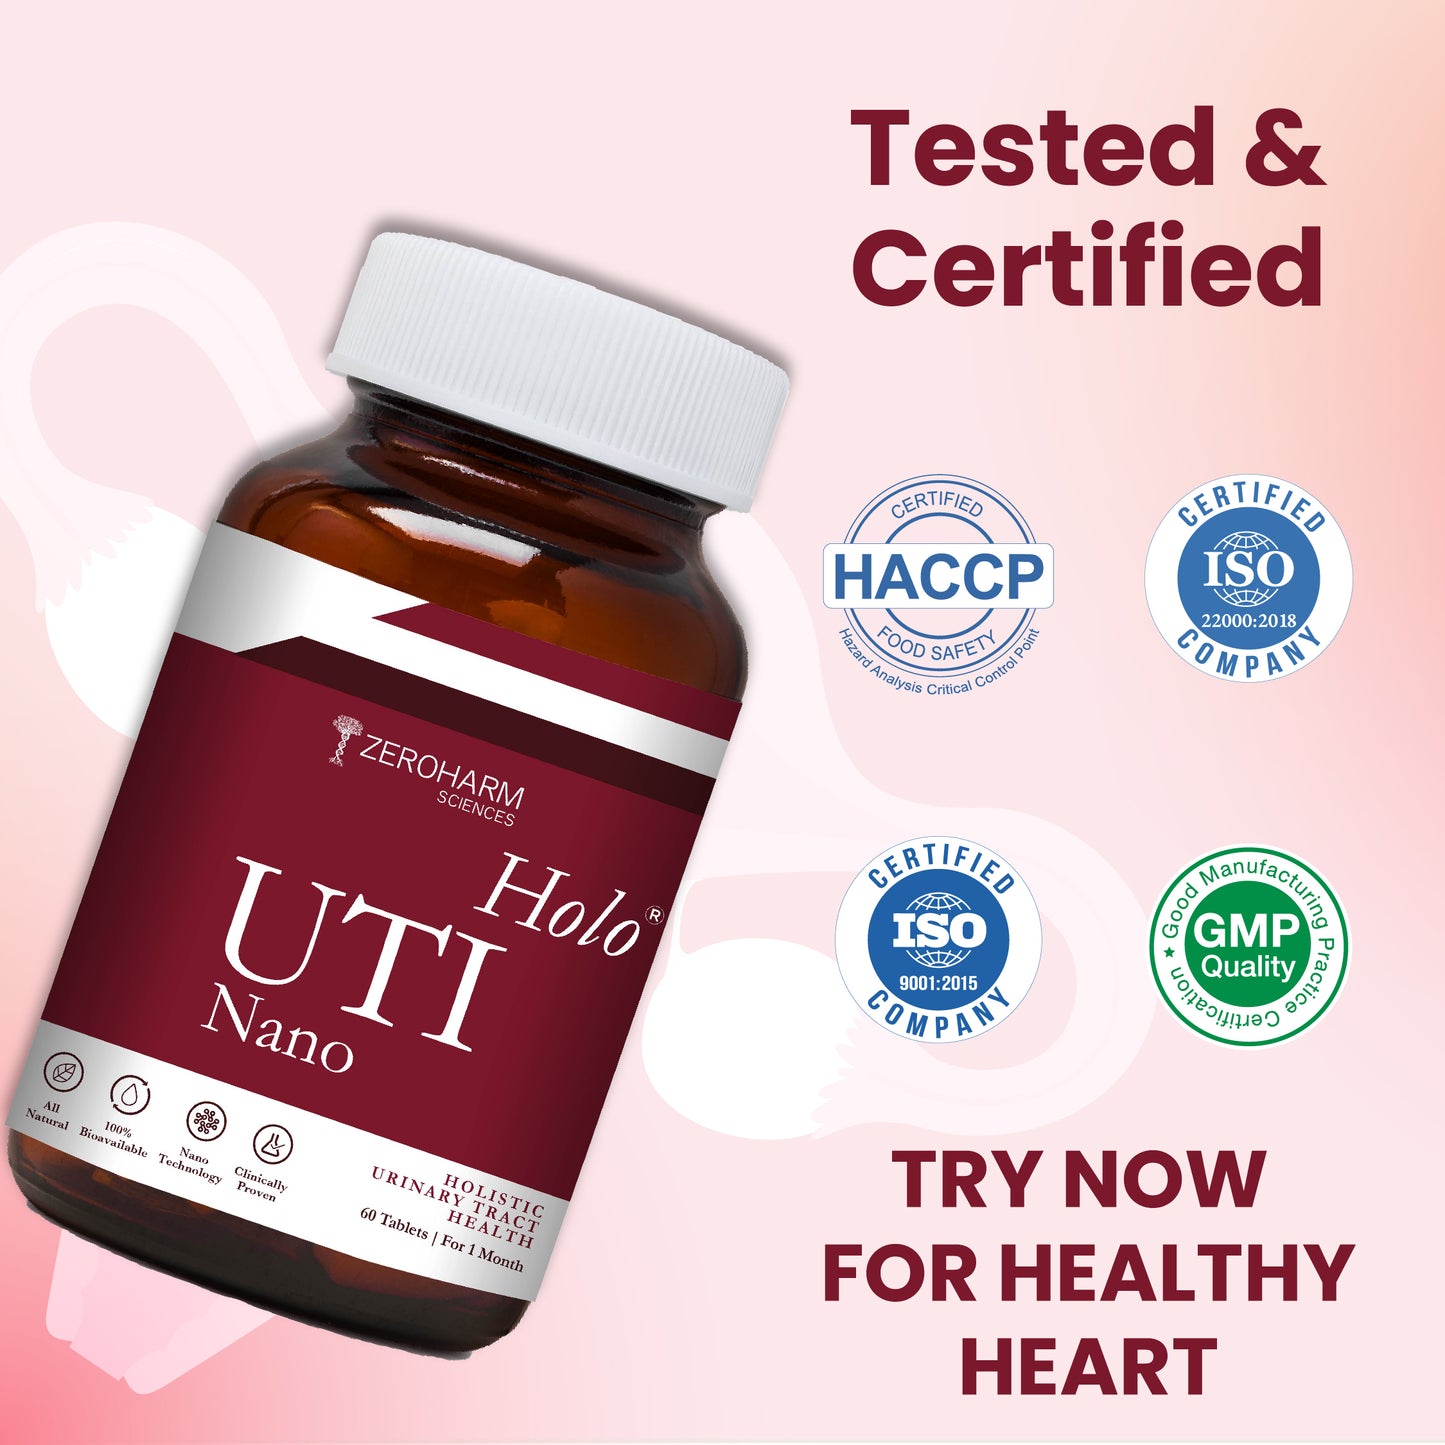 Holo UTI (Urinary Tract Infection) Tablets